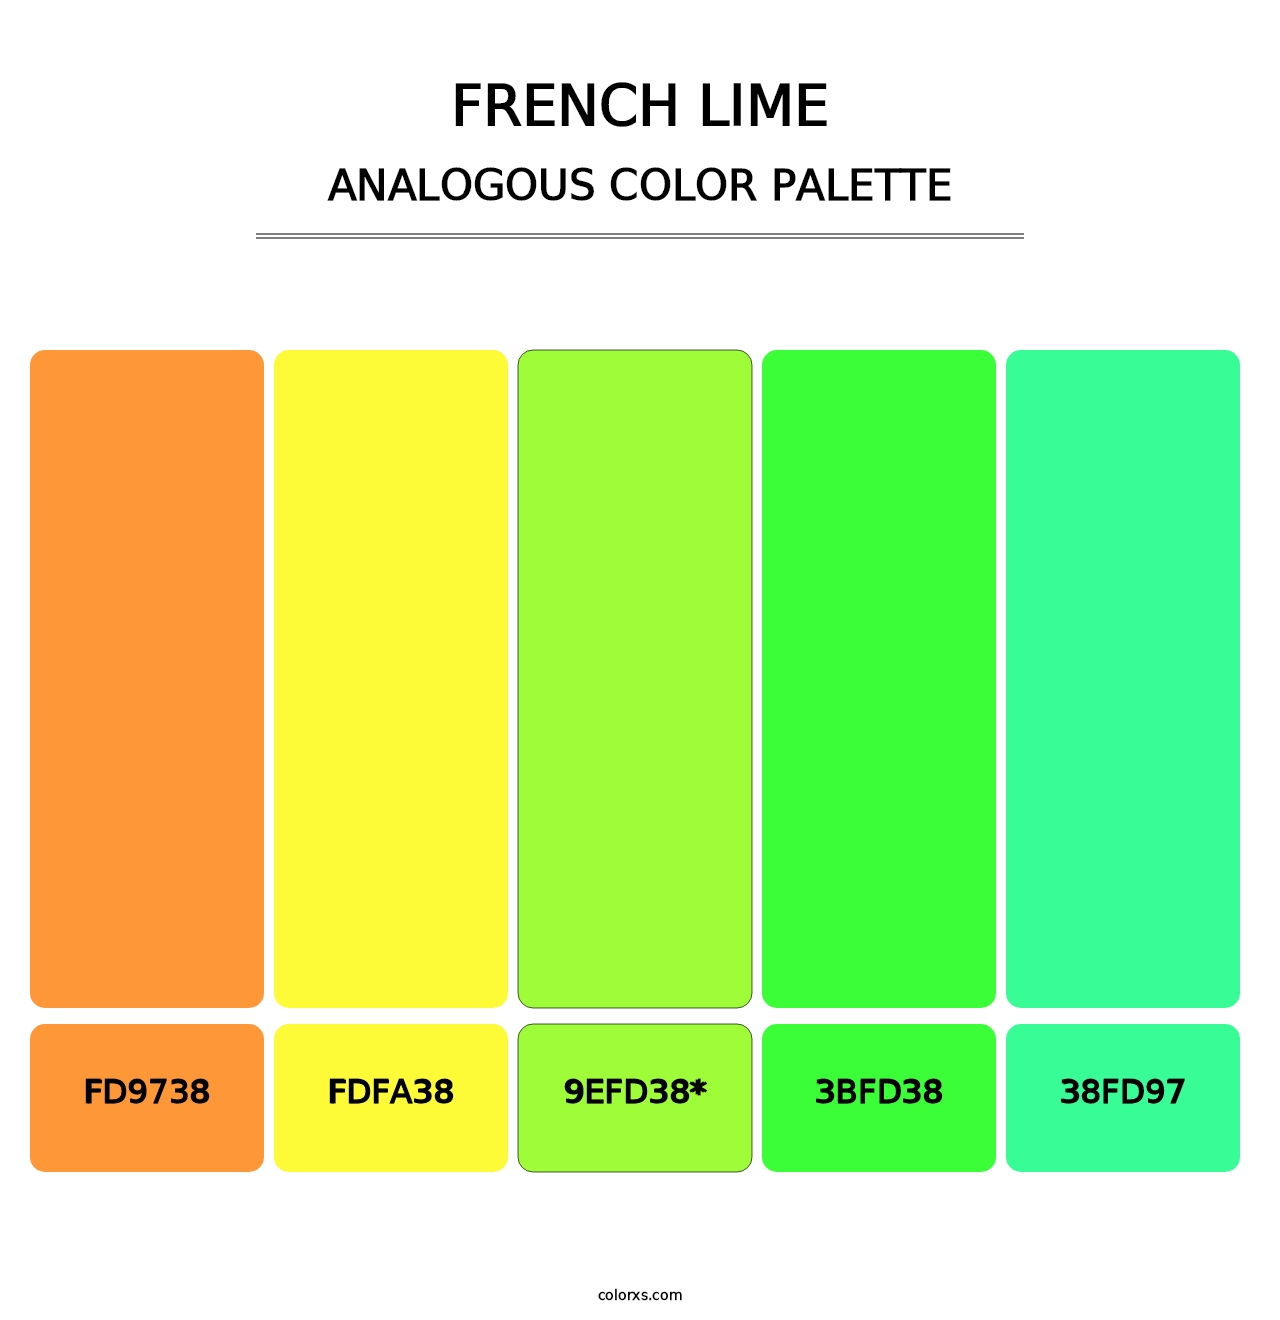 French Lime - Analogous Color Palette